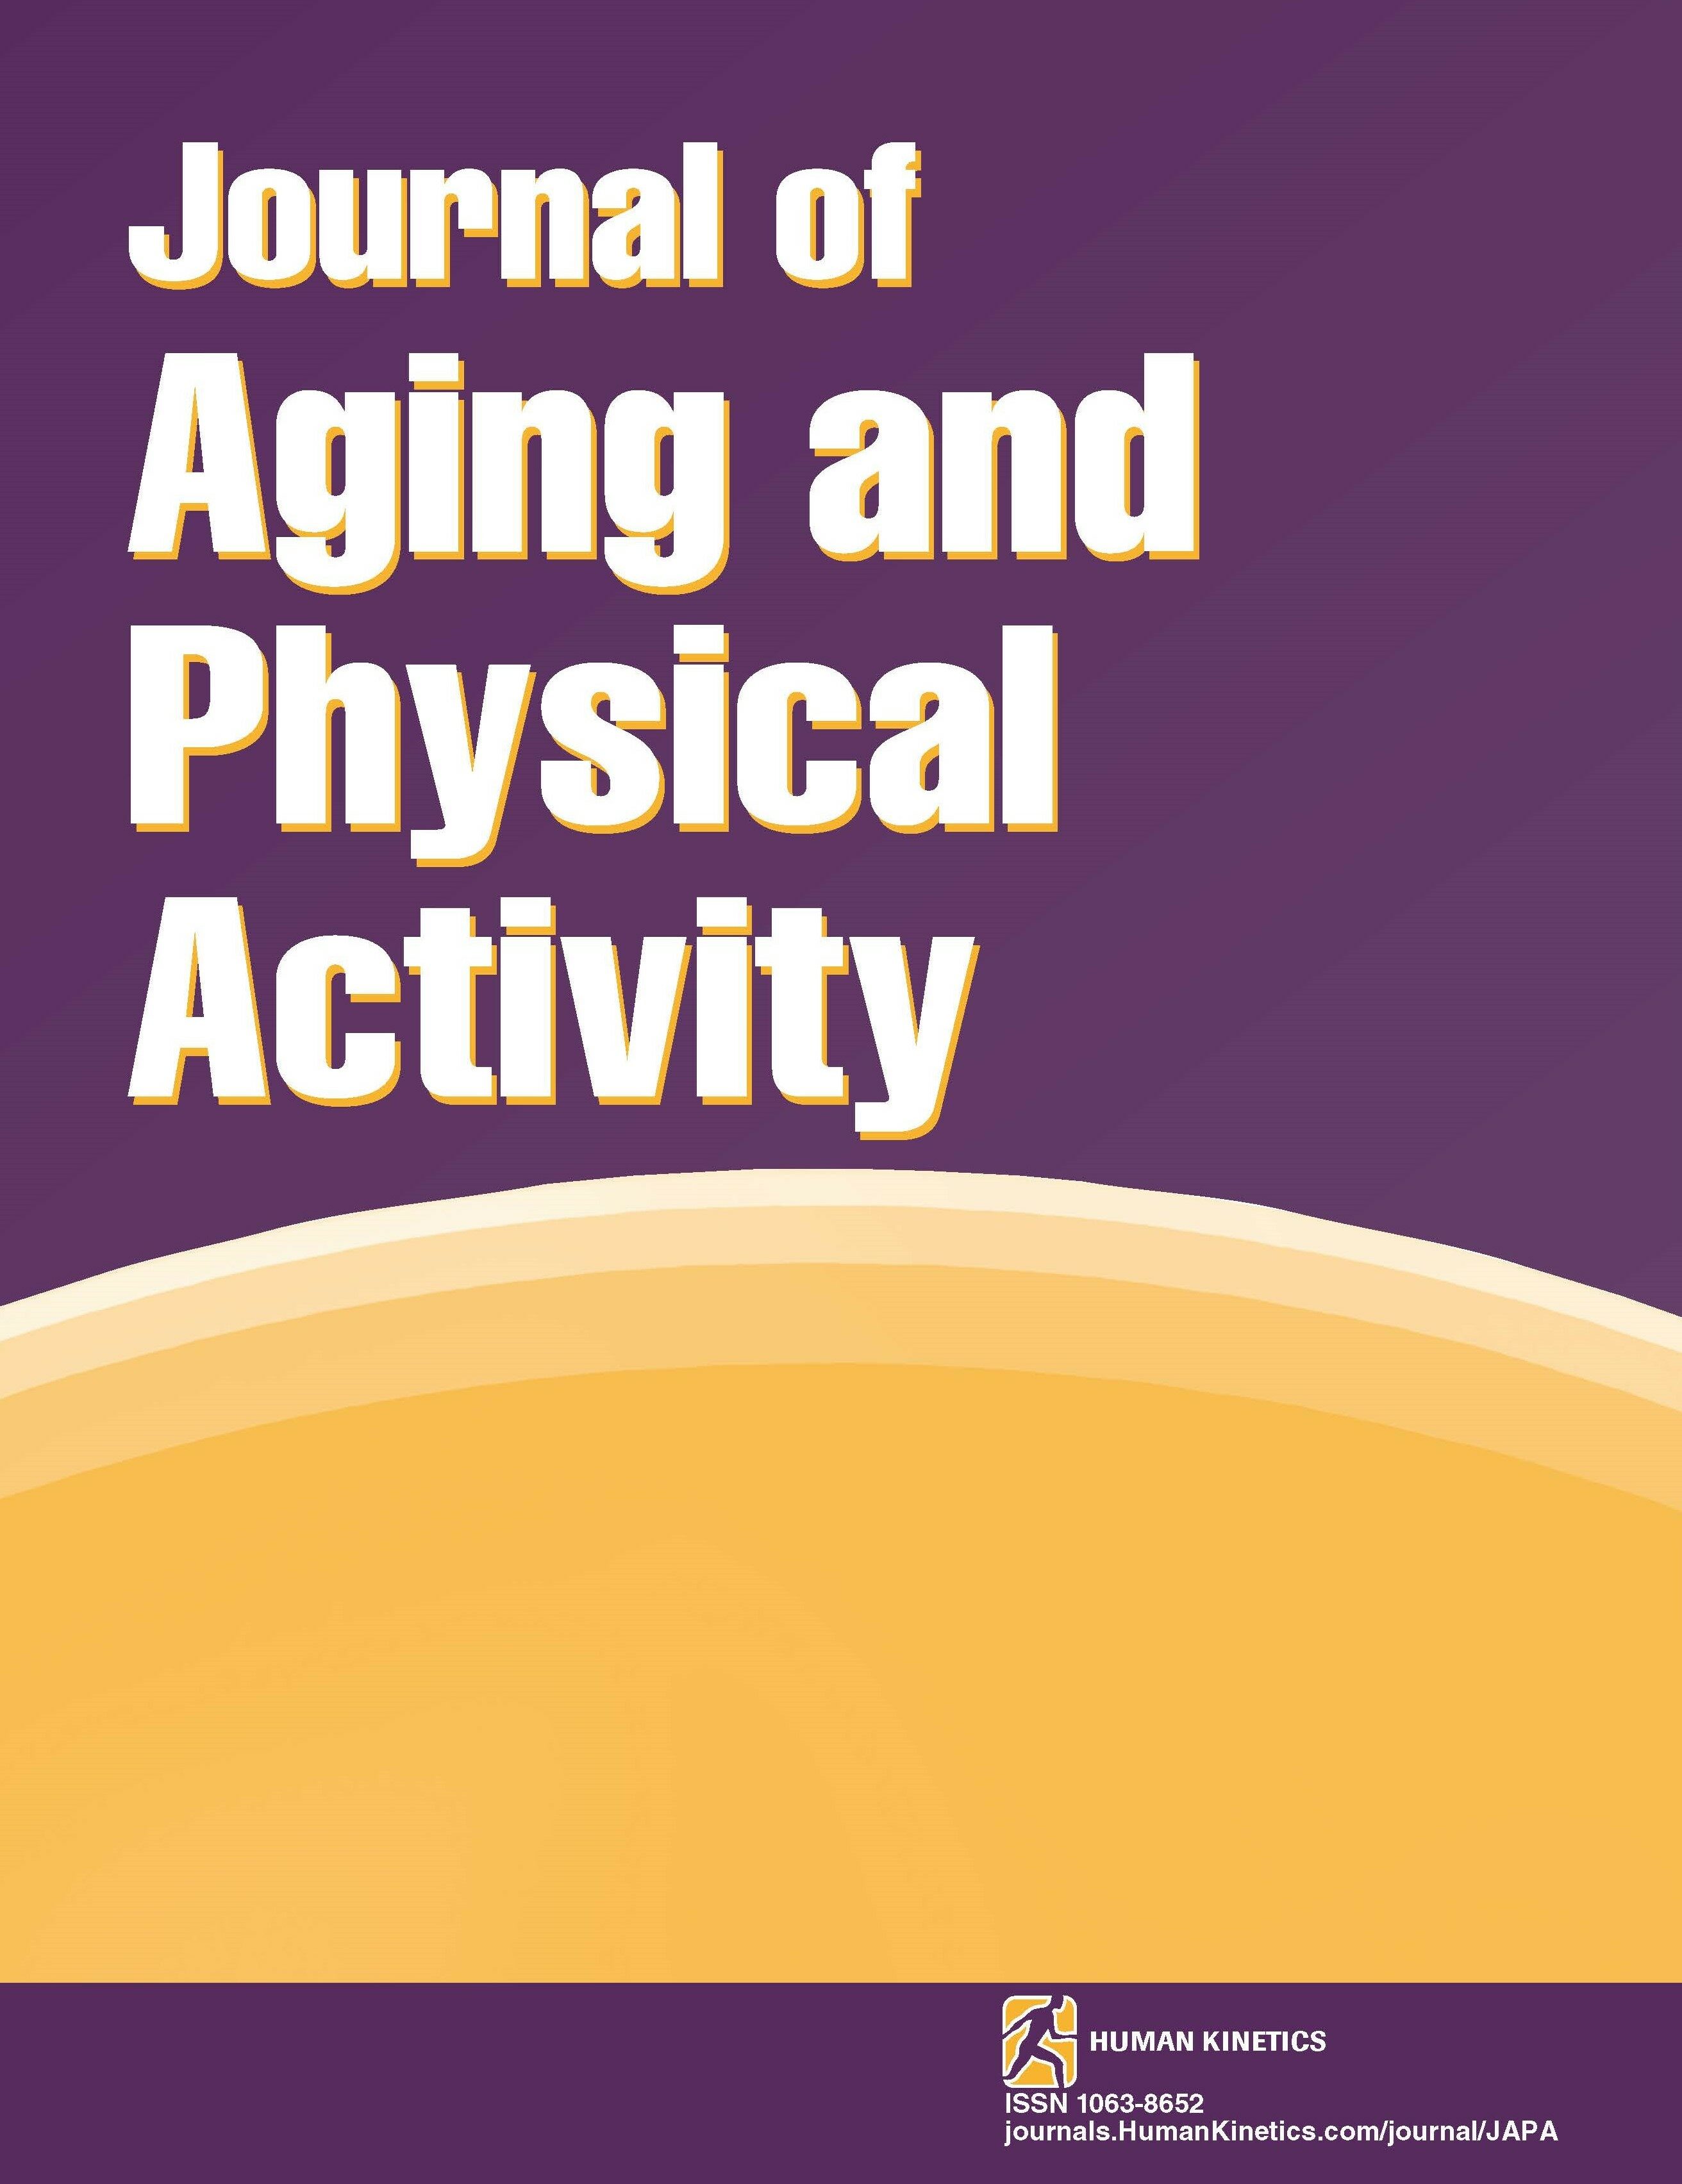 Determination of Body Composition in Community-Dwelling Older Adults With and Without Sarcopenia Using Data From Practical Measures